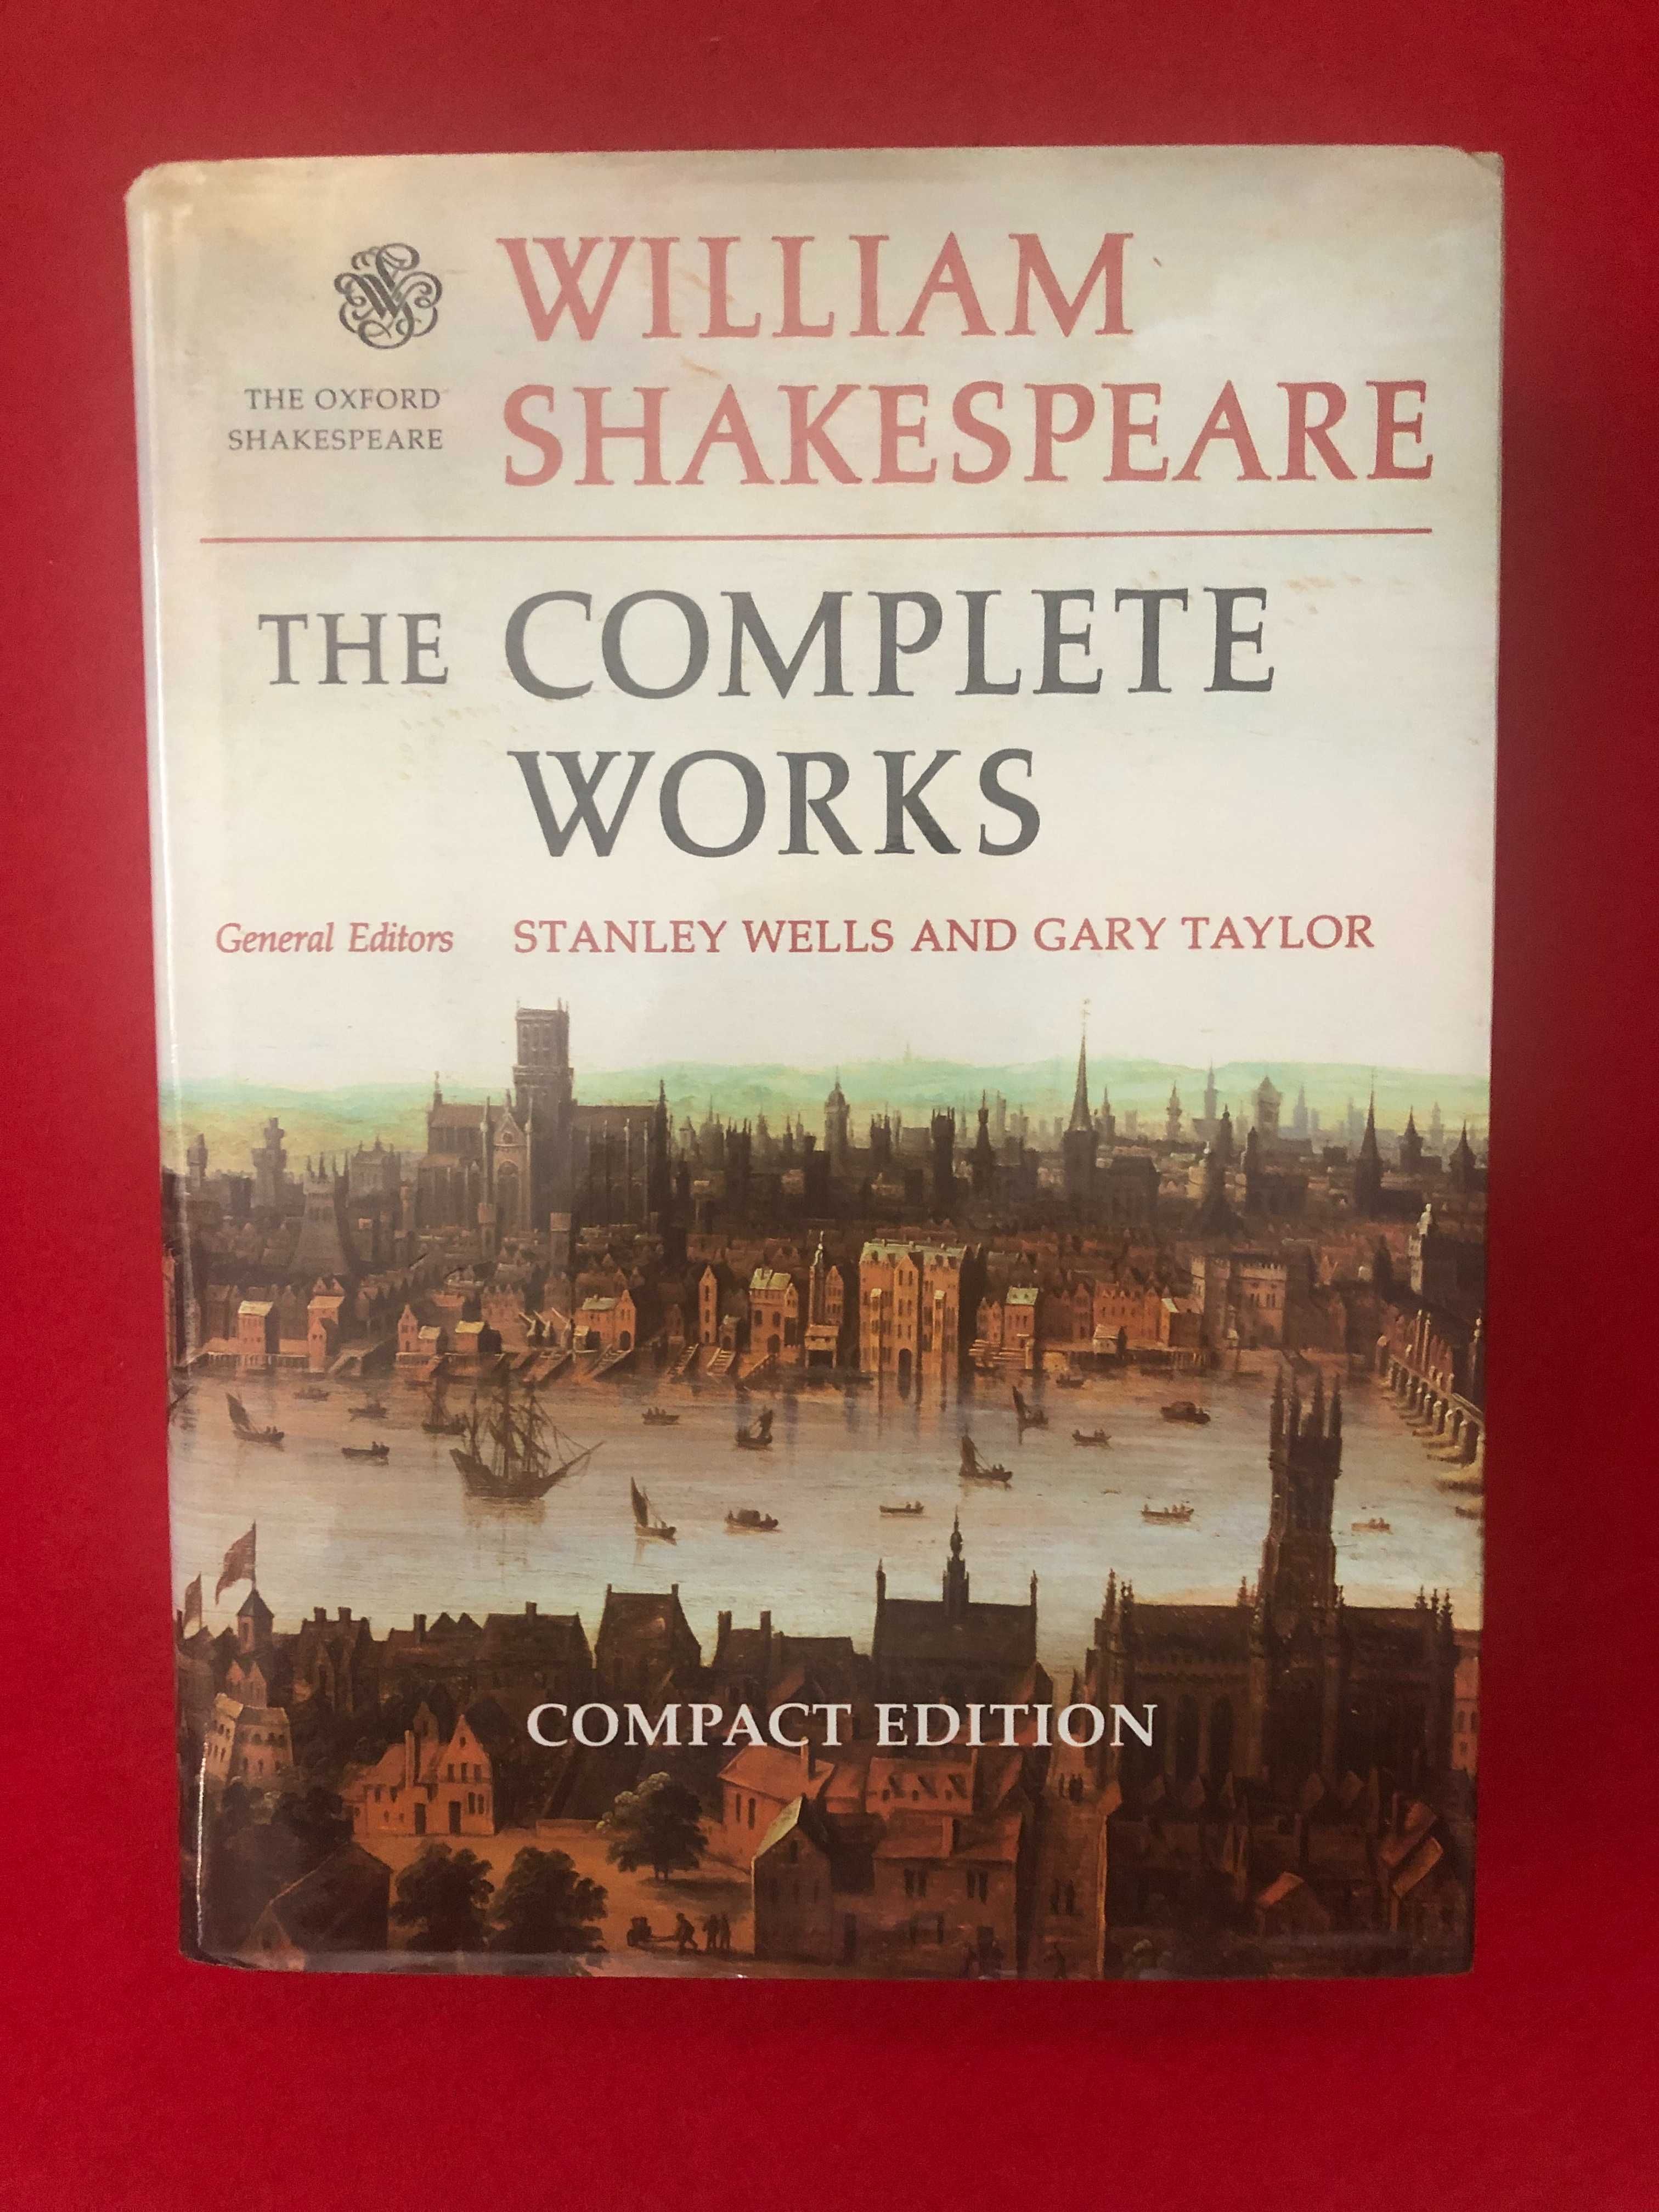 The complete works - William Shakespeare - Oxford University press